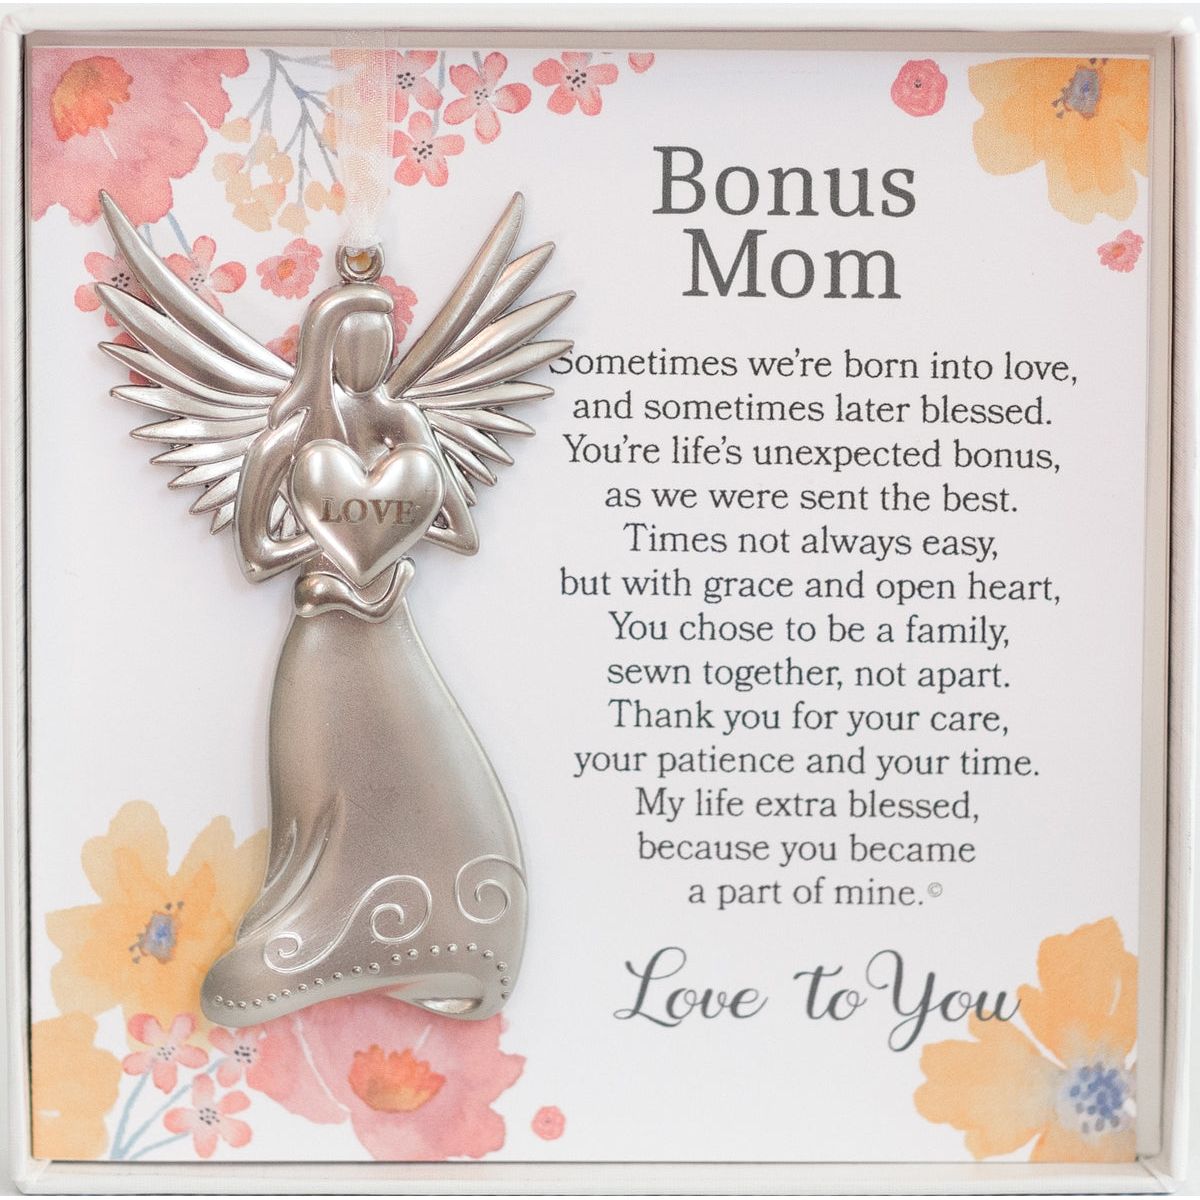 Stepmom Gift - 4" metal love angel ornament with "Bonus Mom" poem in white box with clear lid.